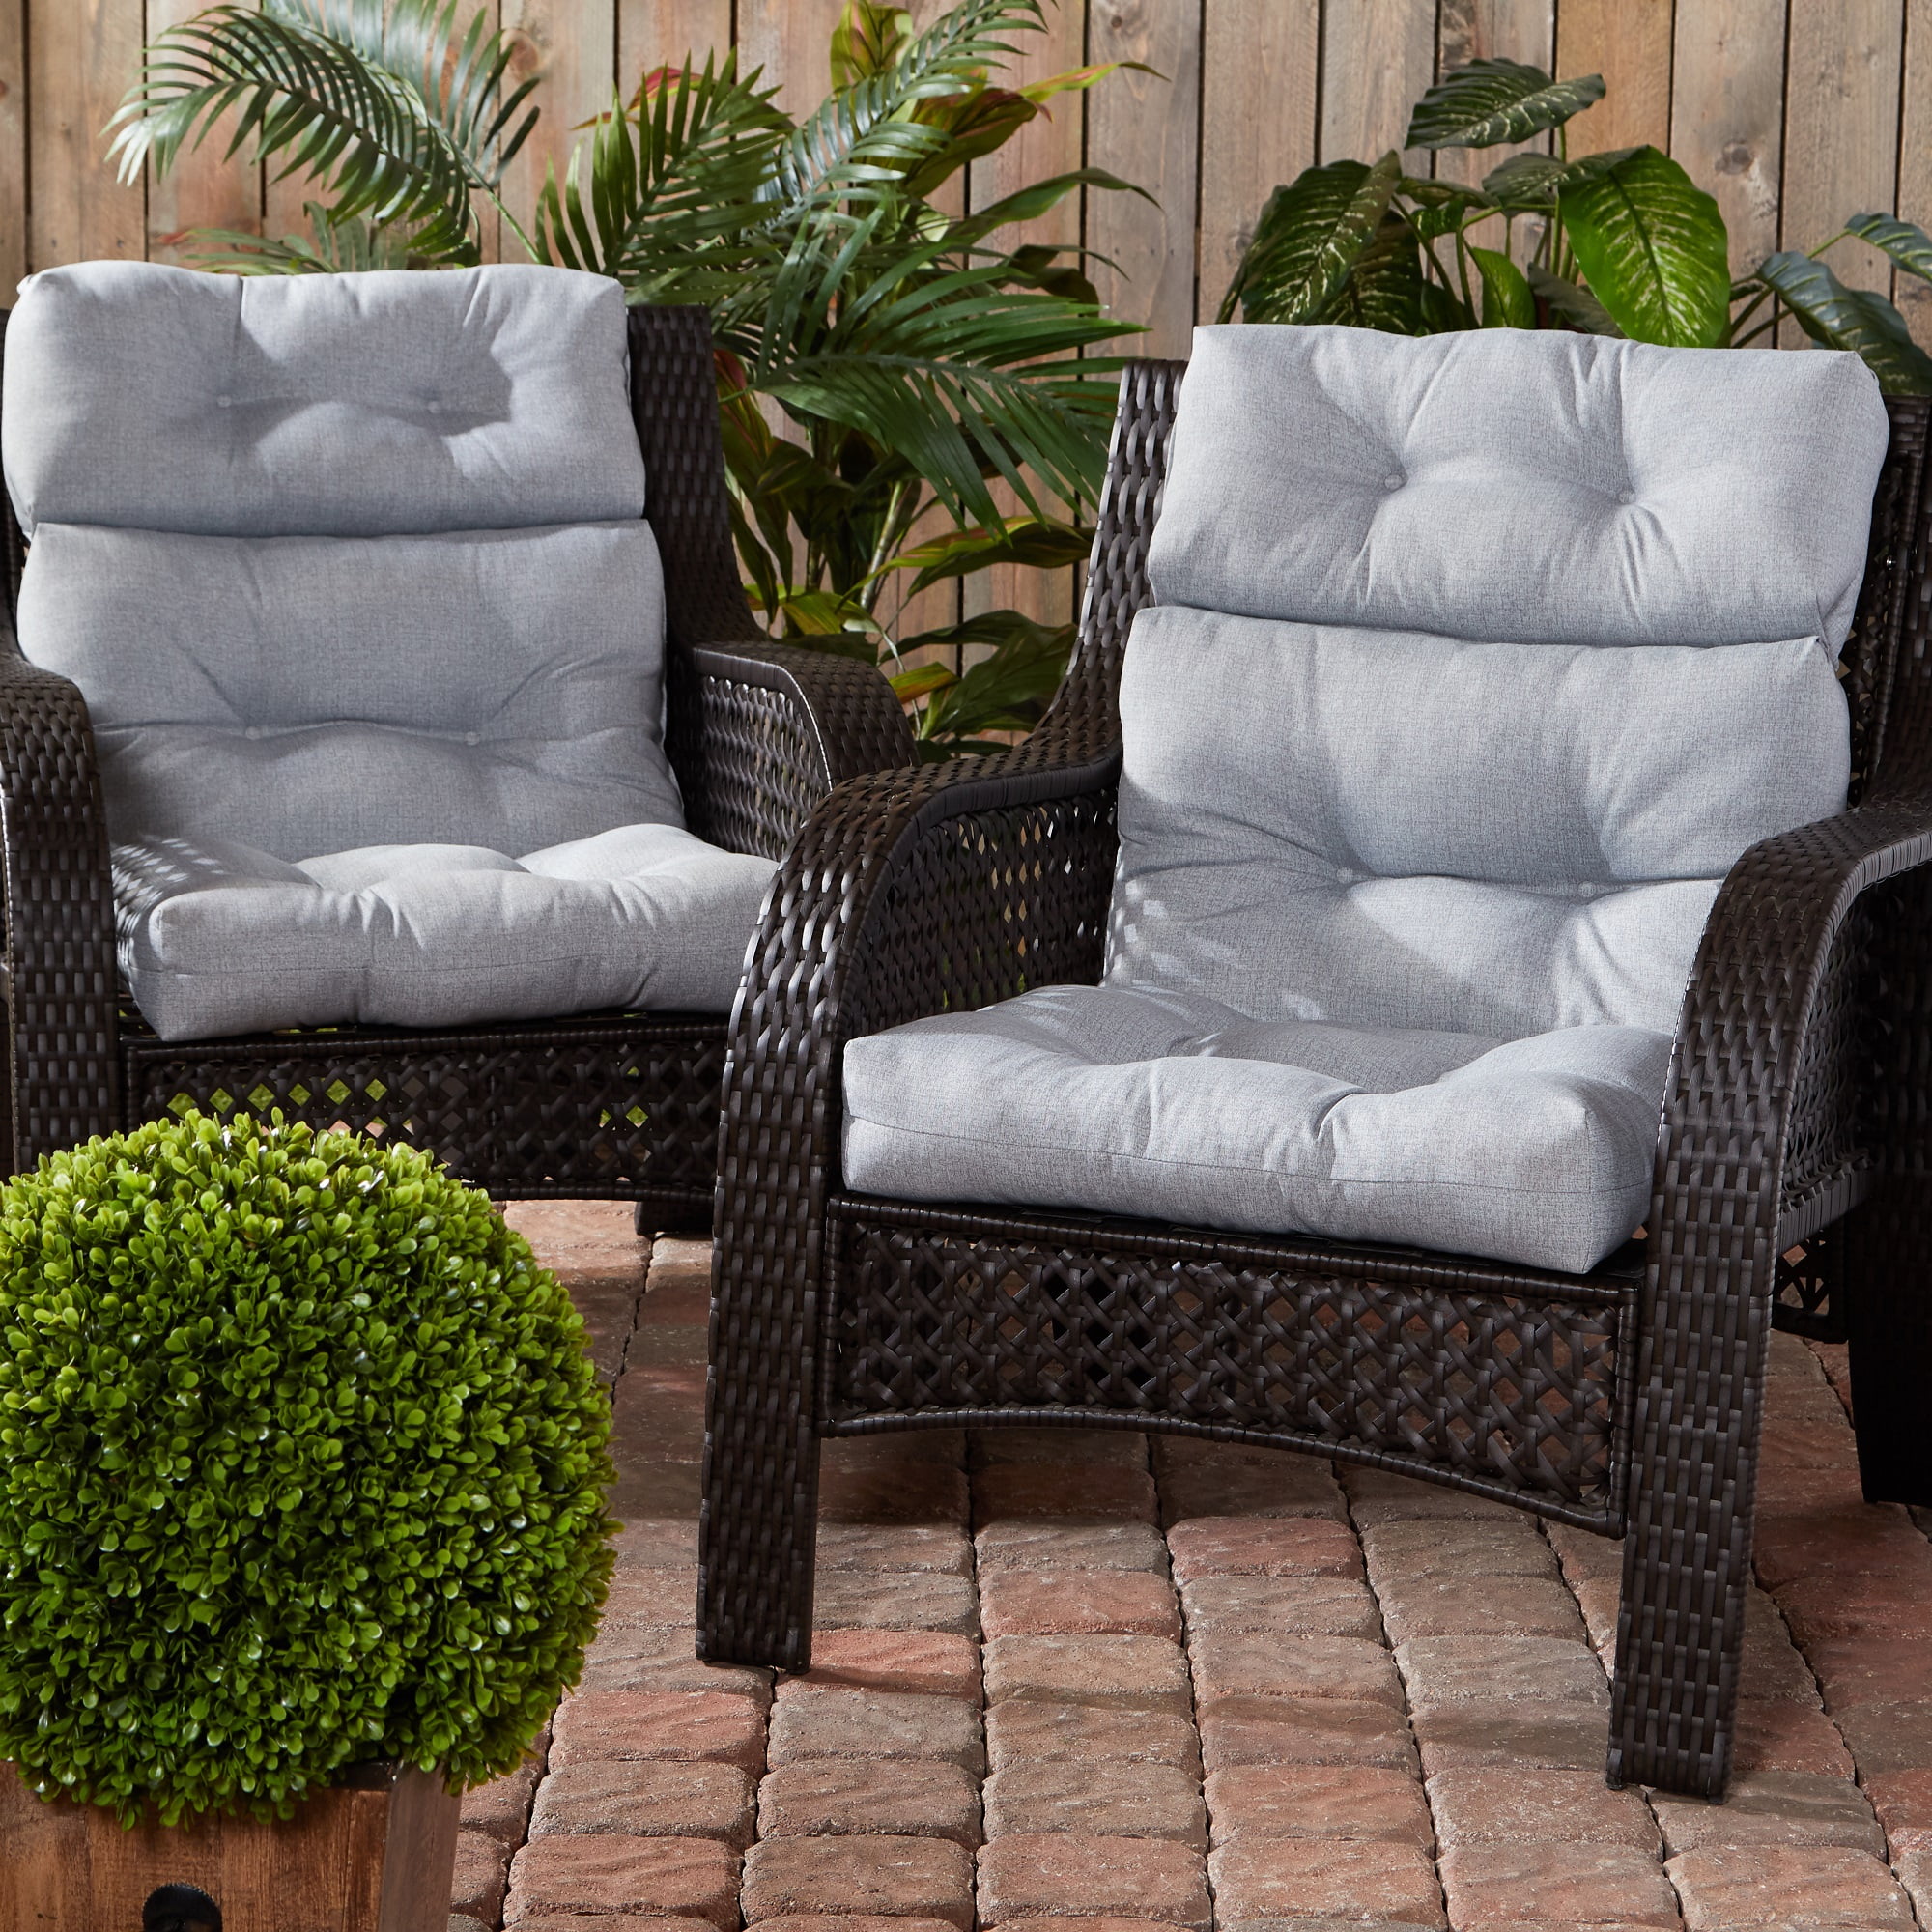 Heather Gray Outdoor High Back Chair Cushion (2pack